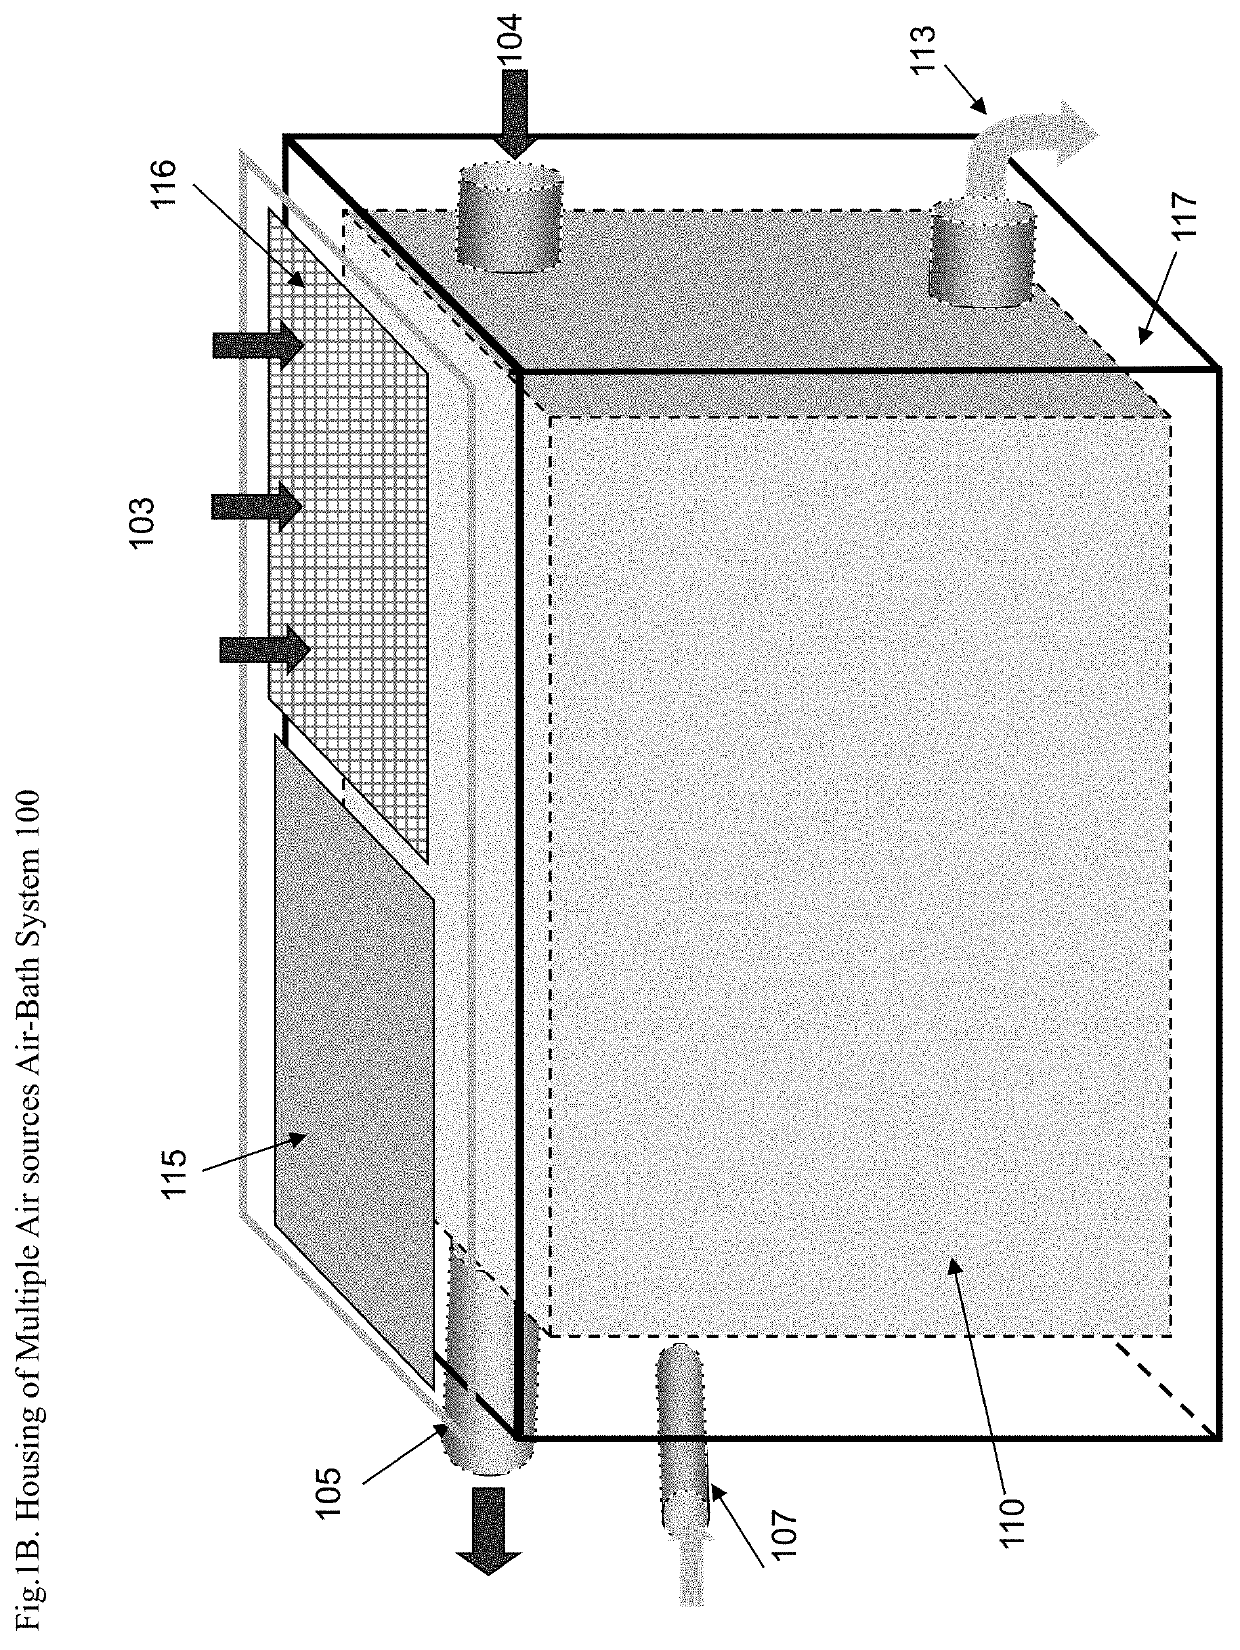 Air purification methodology and apparatus